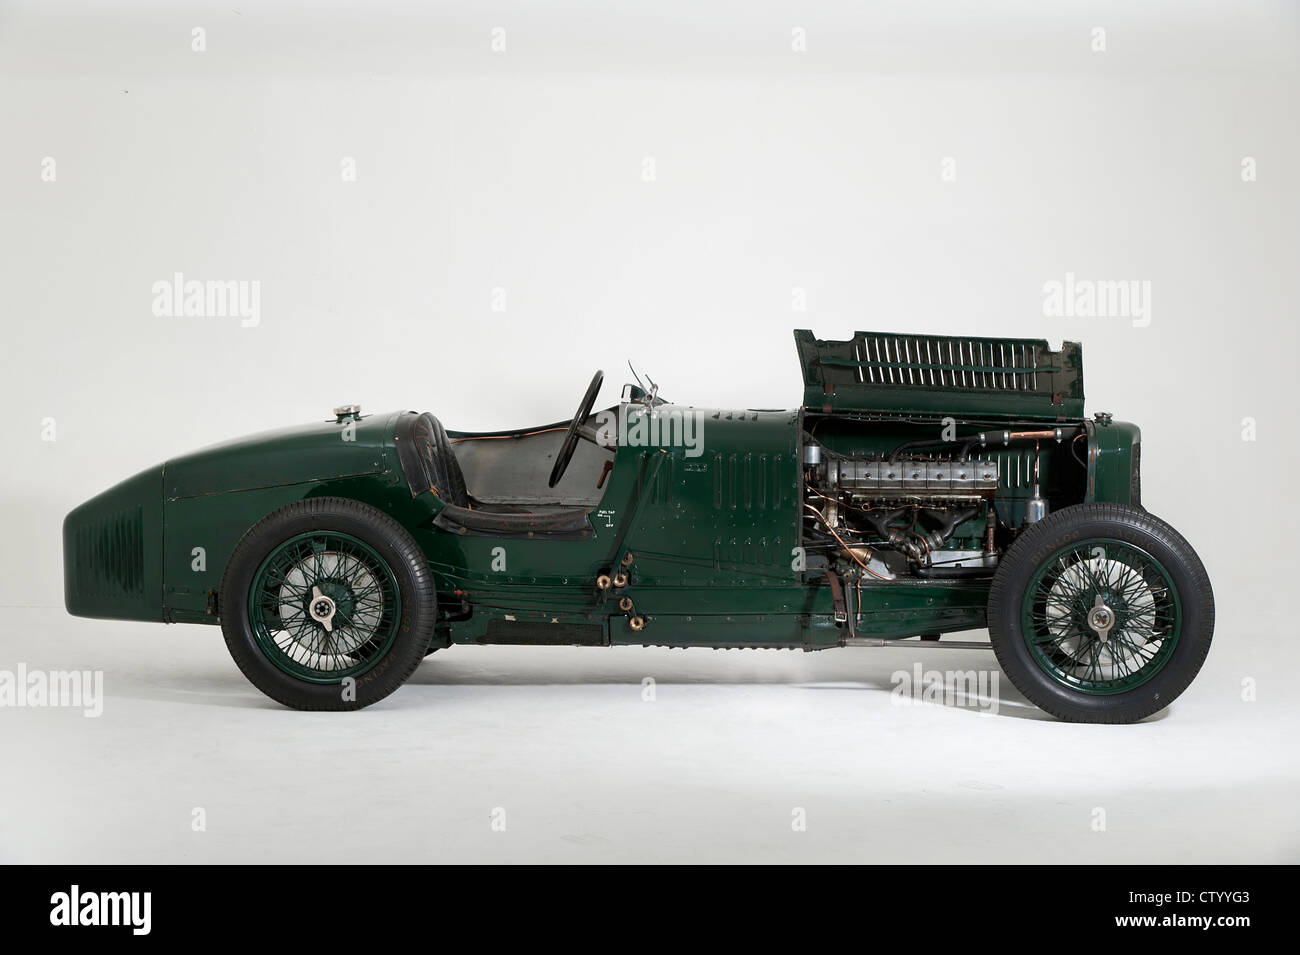 1924 Sunbeam Cub 2 litre with engine exposed Stock Photo